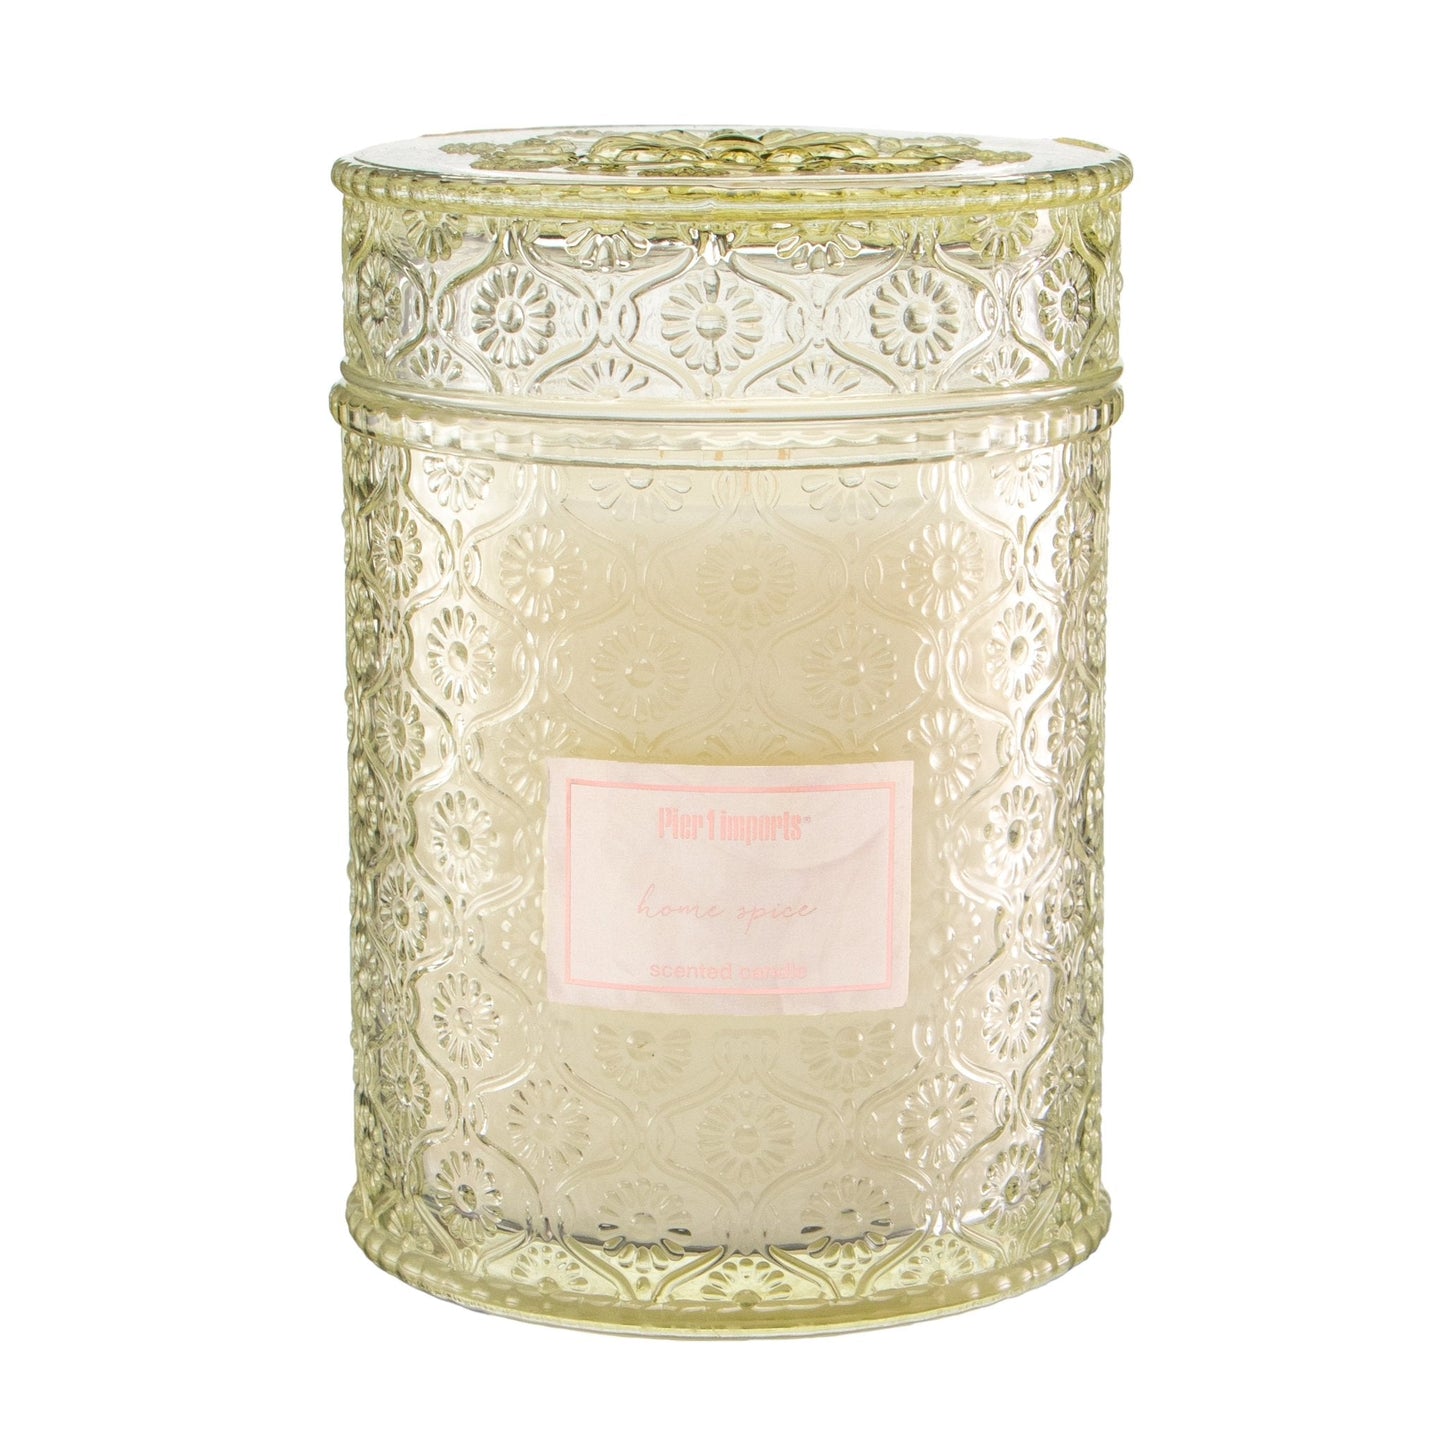 Pier 1 Home Spice Luxe 19oz Filled Candle - Pier 1